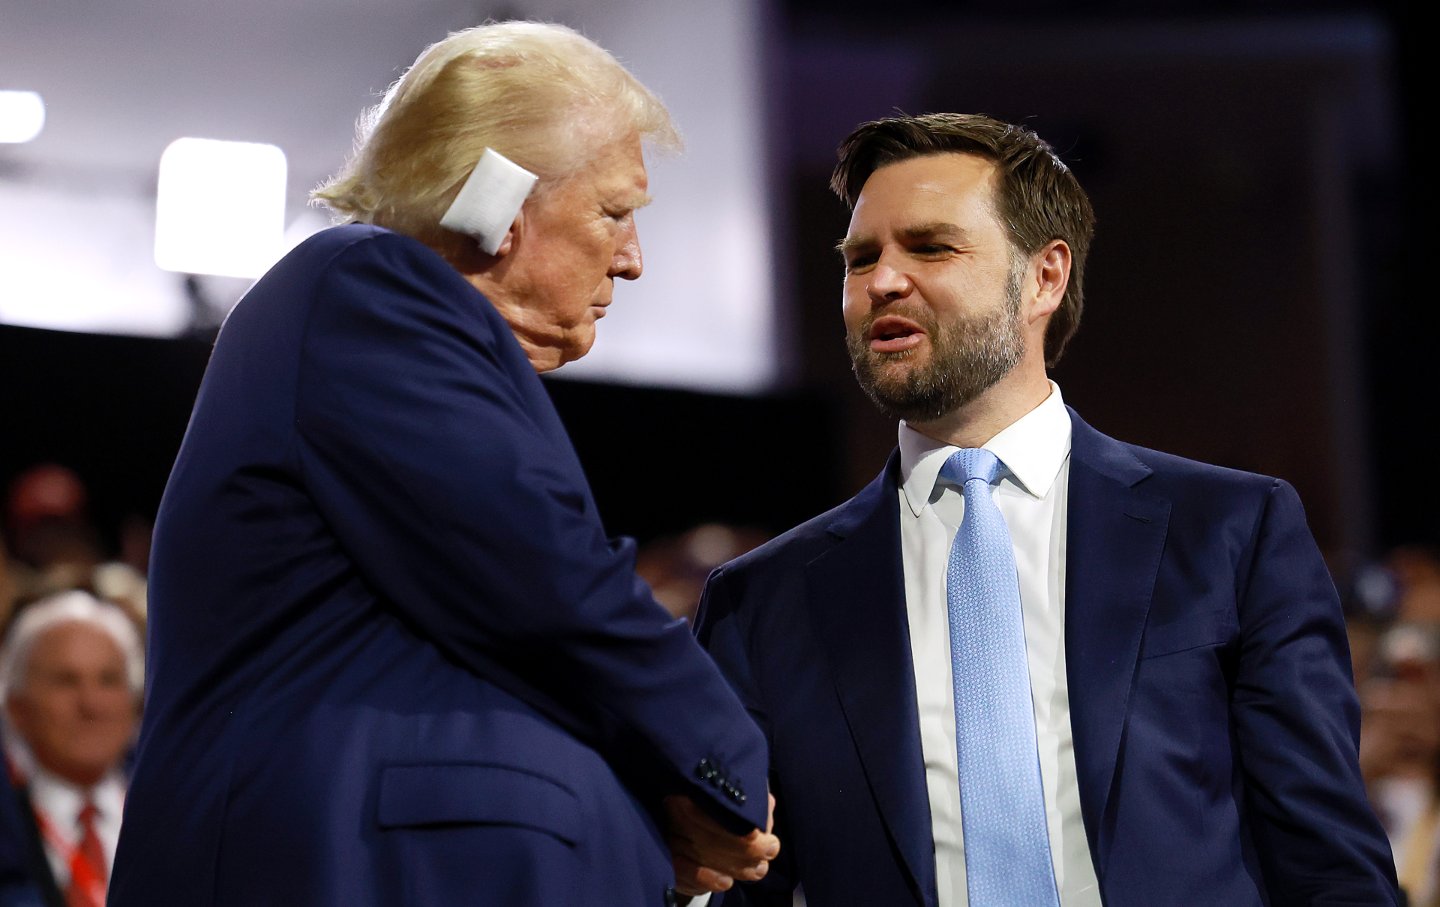 Trump leans toward J.D. Vance to shake his hand, onstage at the RNC.